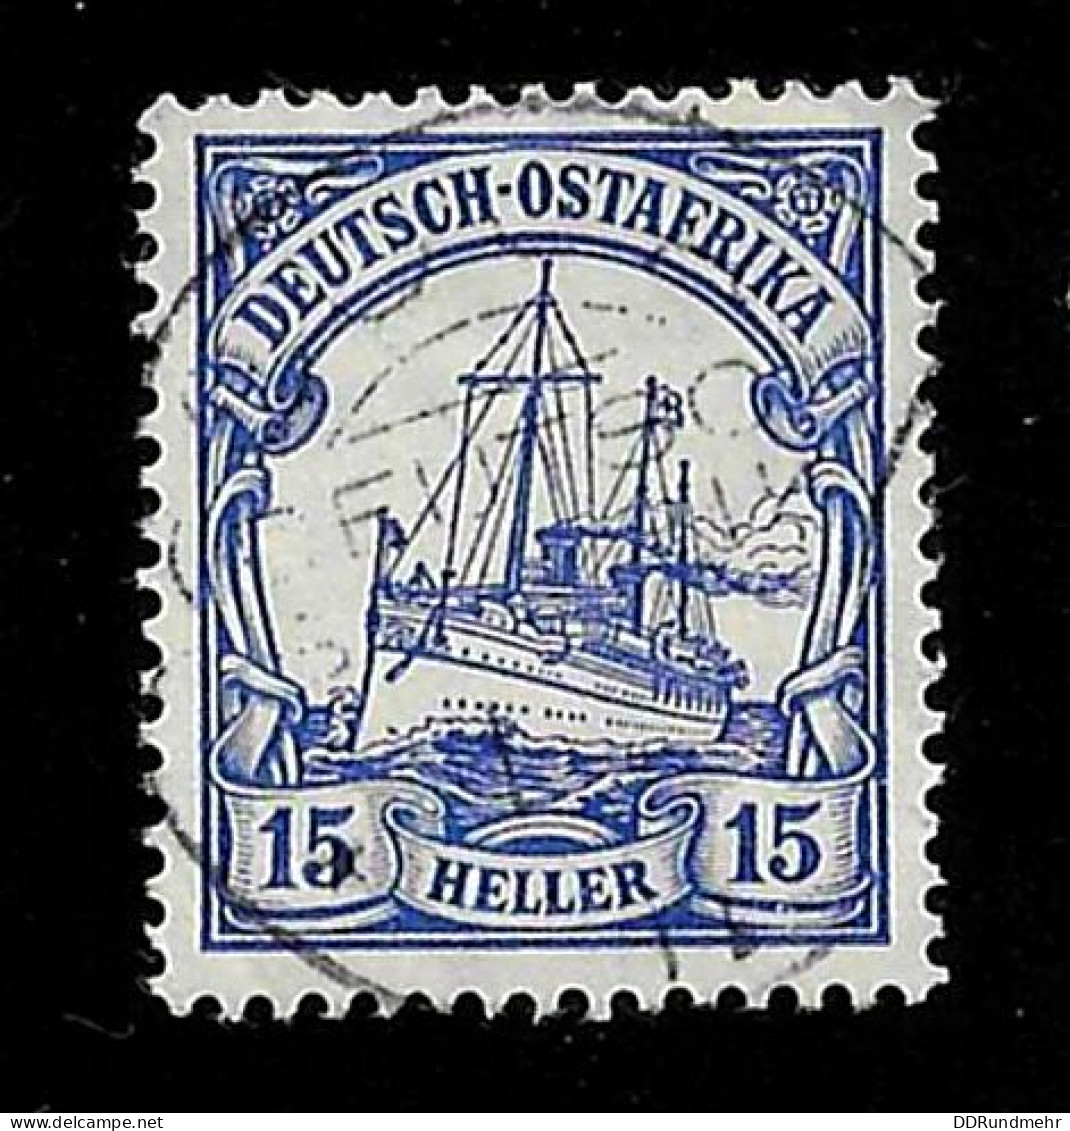 1906 SMS Hohenzollern  Michel DR-OA 33a Stamp Number DR-OA 34a Yvert Et Tellier DR-OA 33 Used - Duits-Oost-Afrika